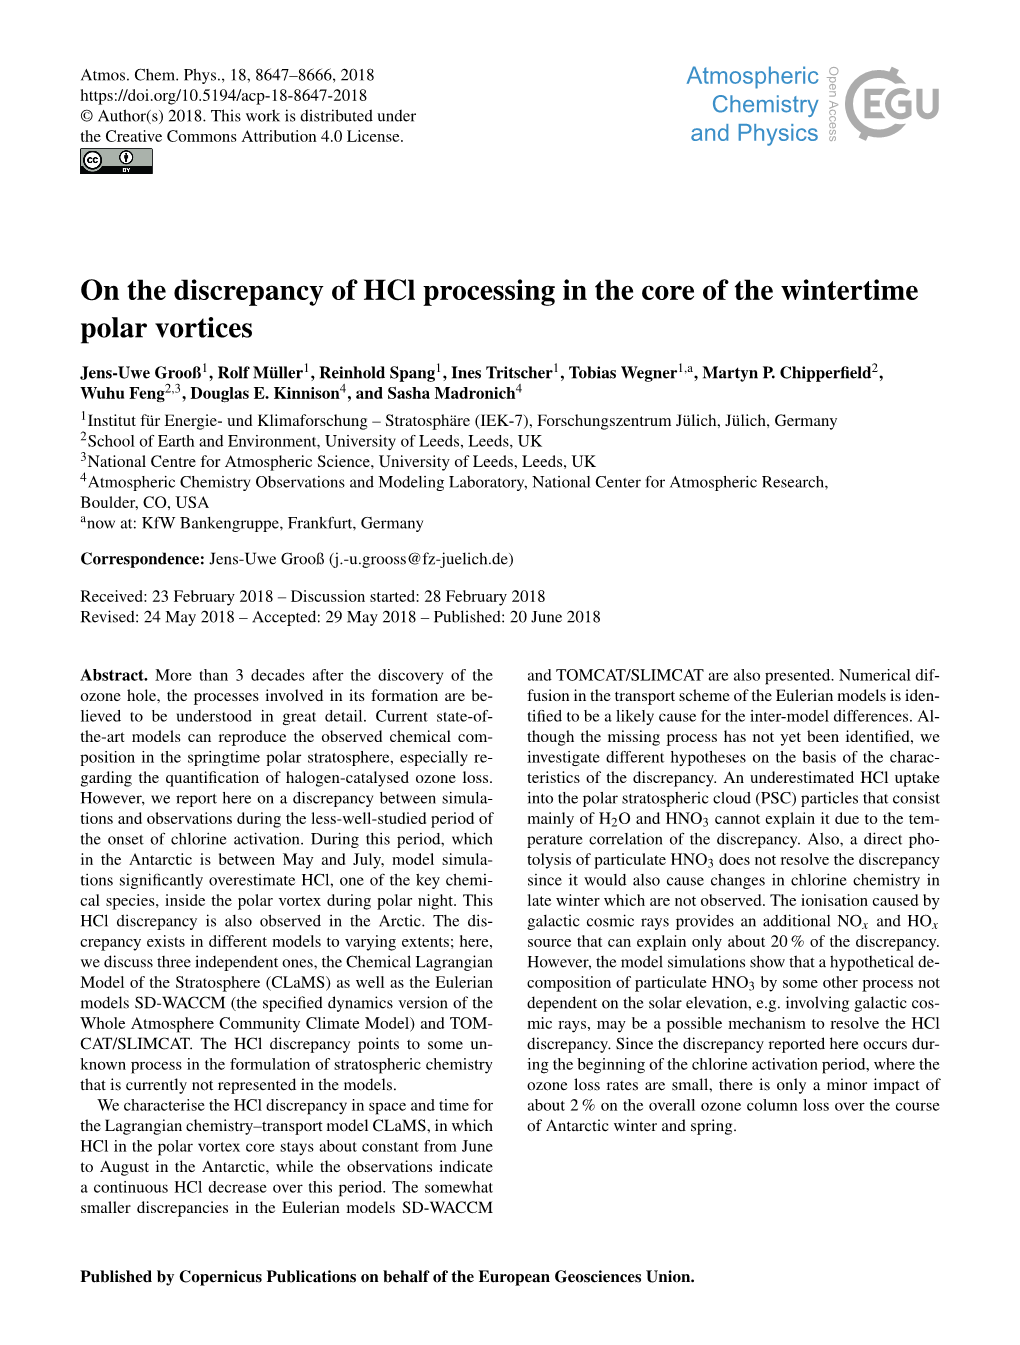 On the Discrepancy of Hcl Processing in the Core of the Wintertime Polar Vortices